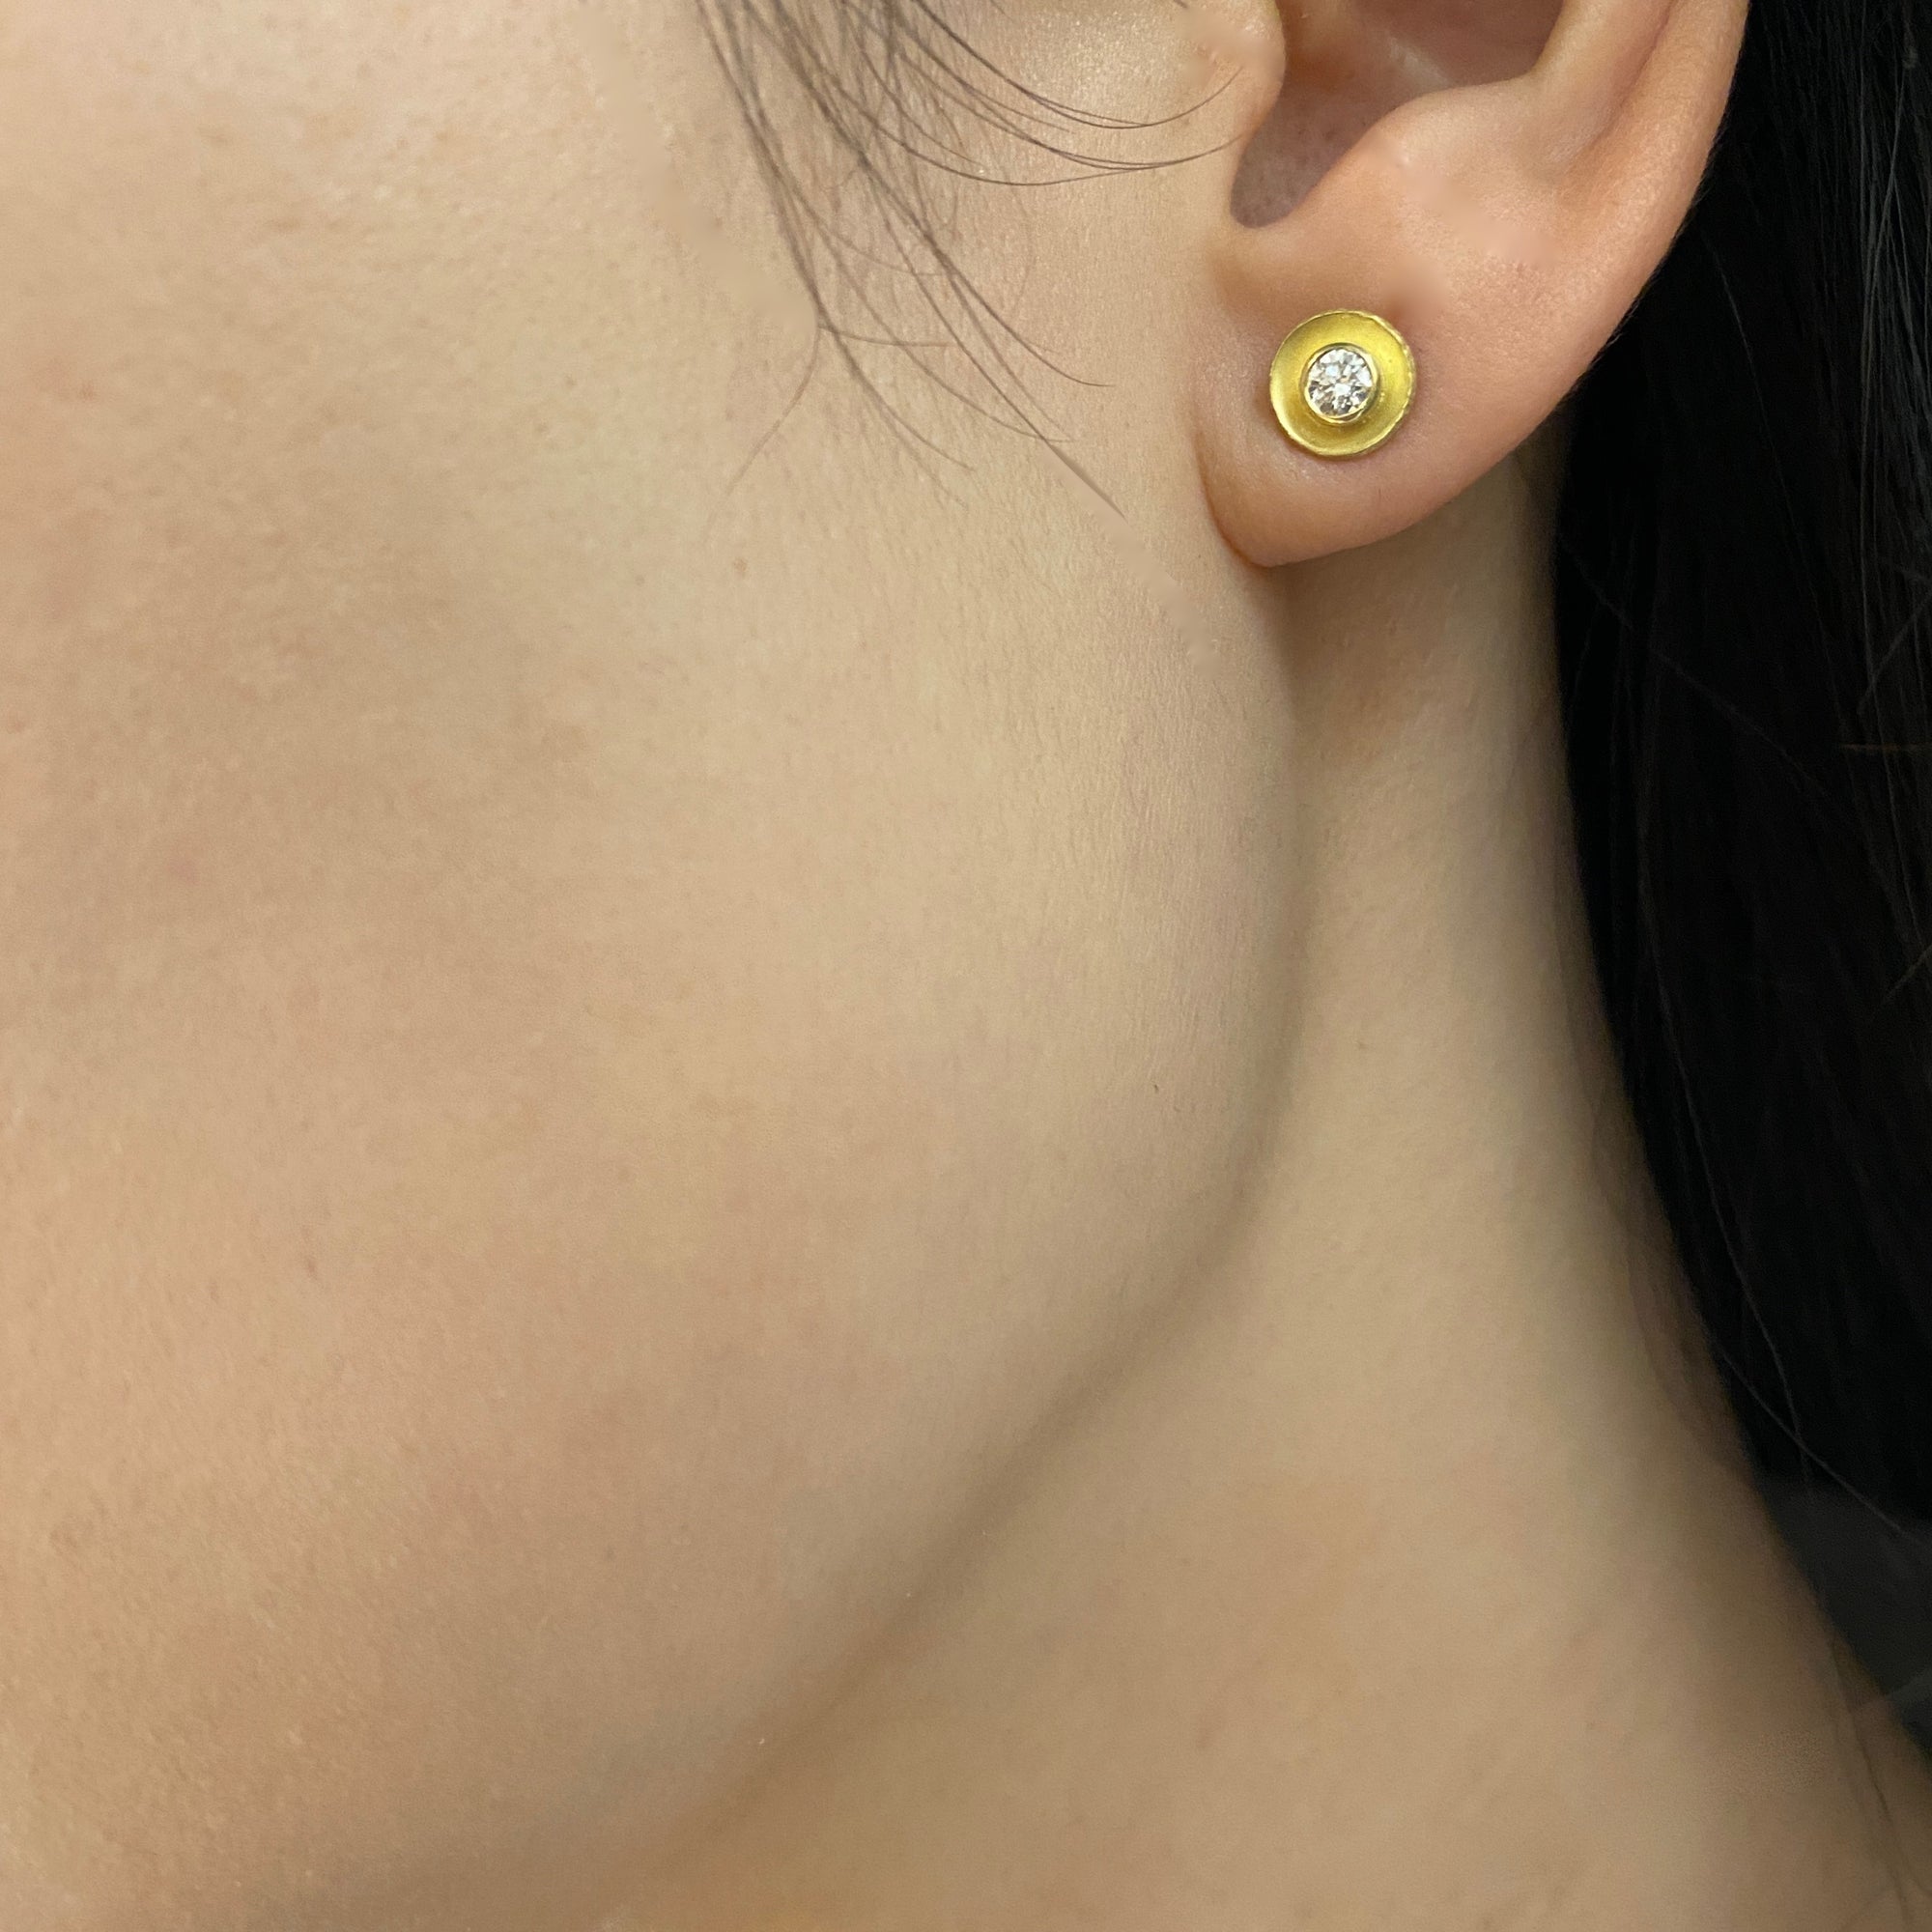 Petite concave sphere earrings in 18K yellow gold with diamonds